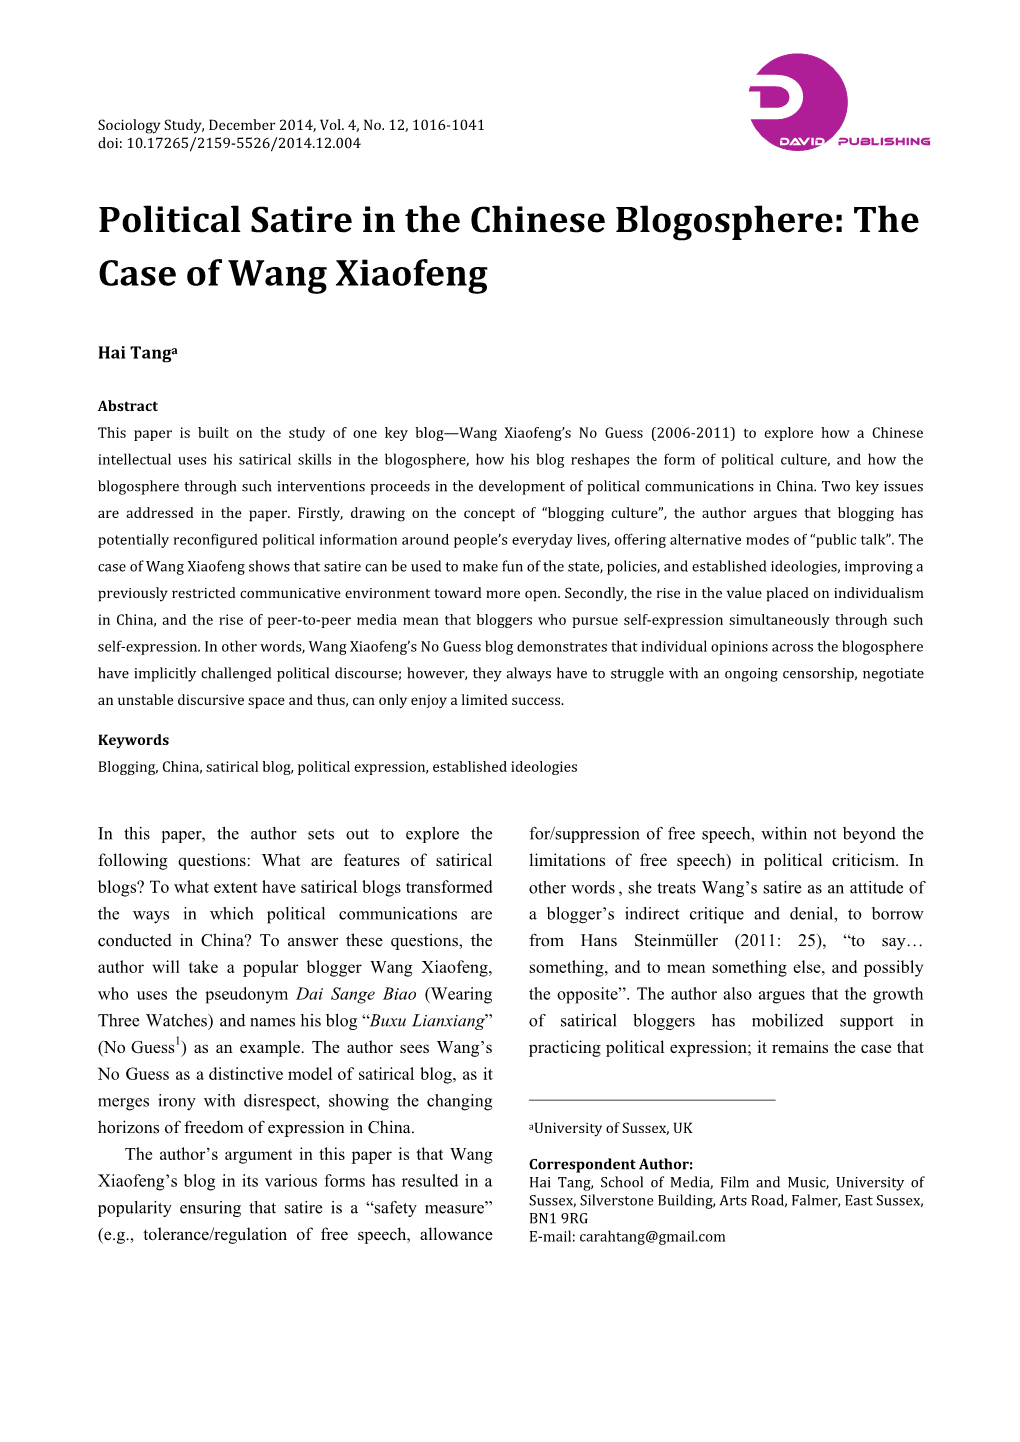 Political Satire in the Chinese Blogosphere: the Case of Wang Xiaofeng